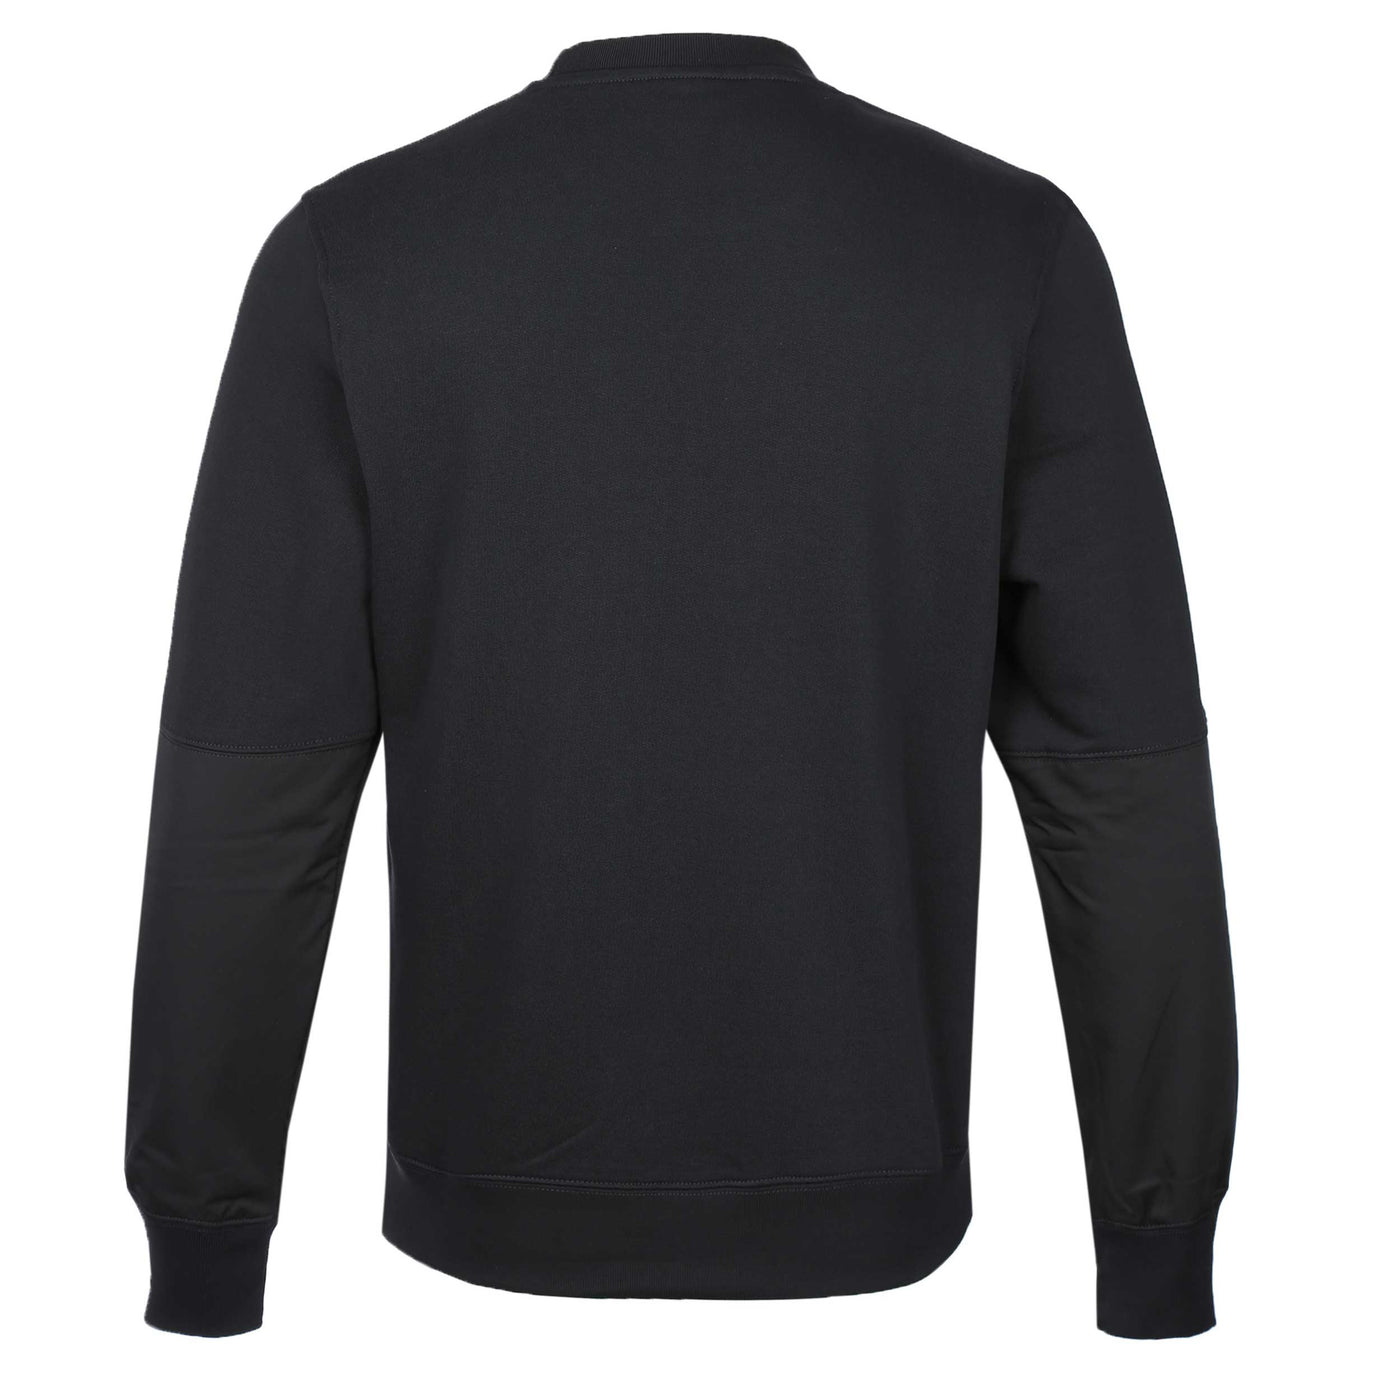 Paul Smith Chest Pocket Sweat Top in Black Back